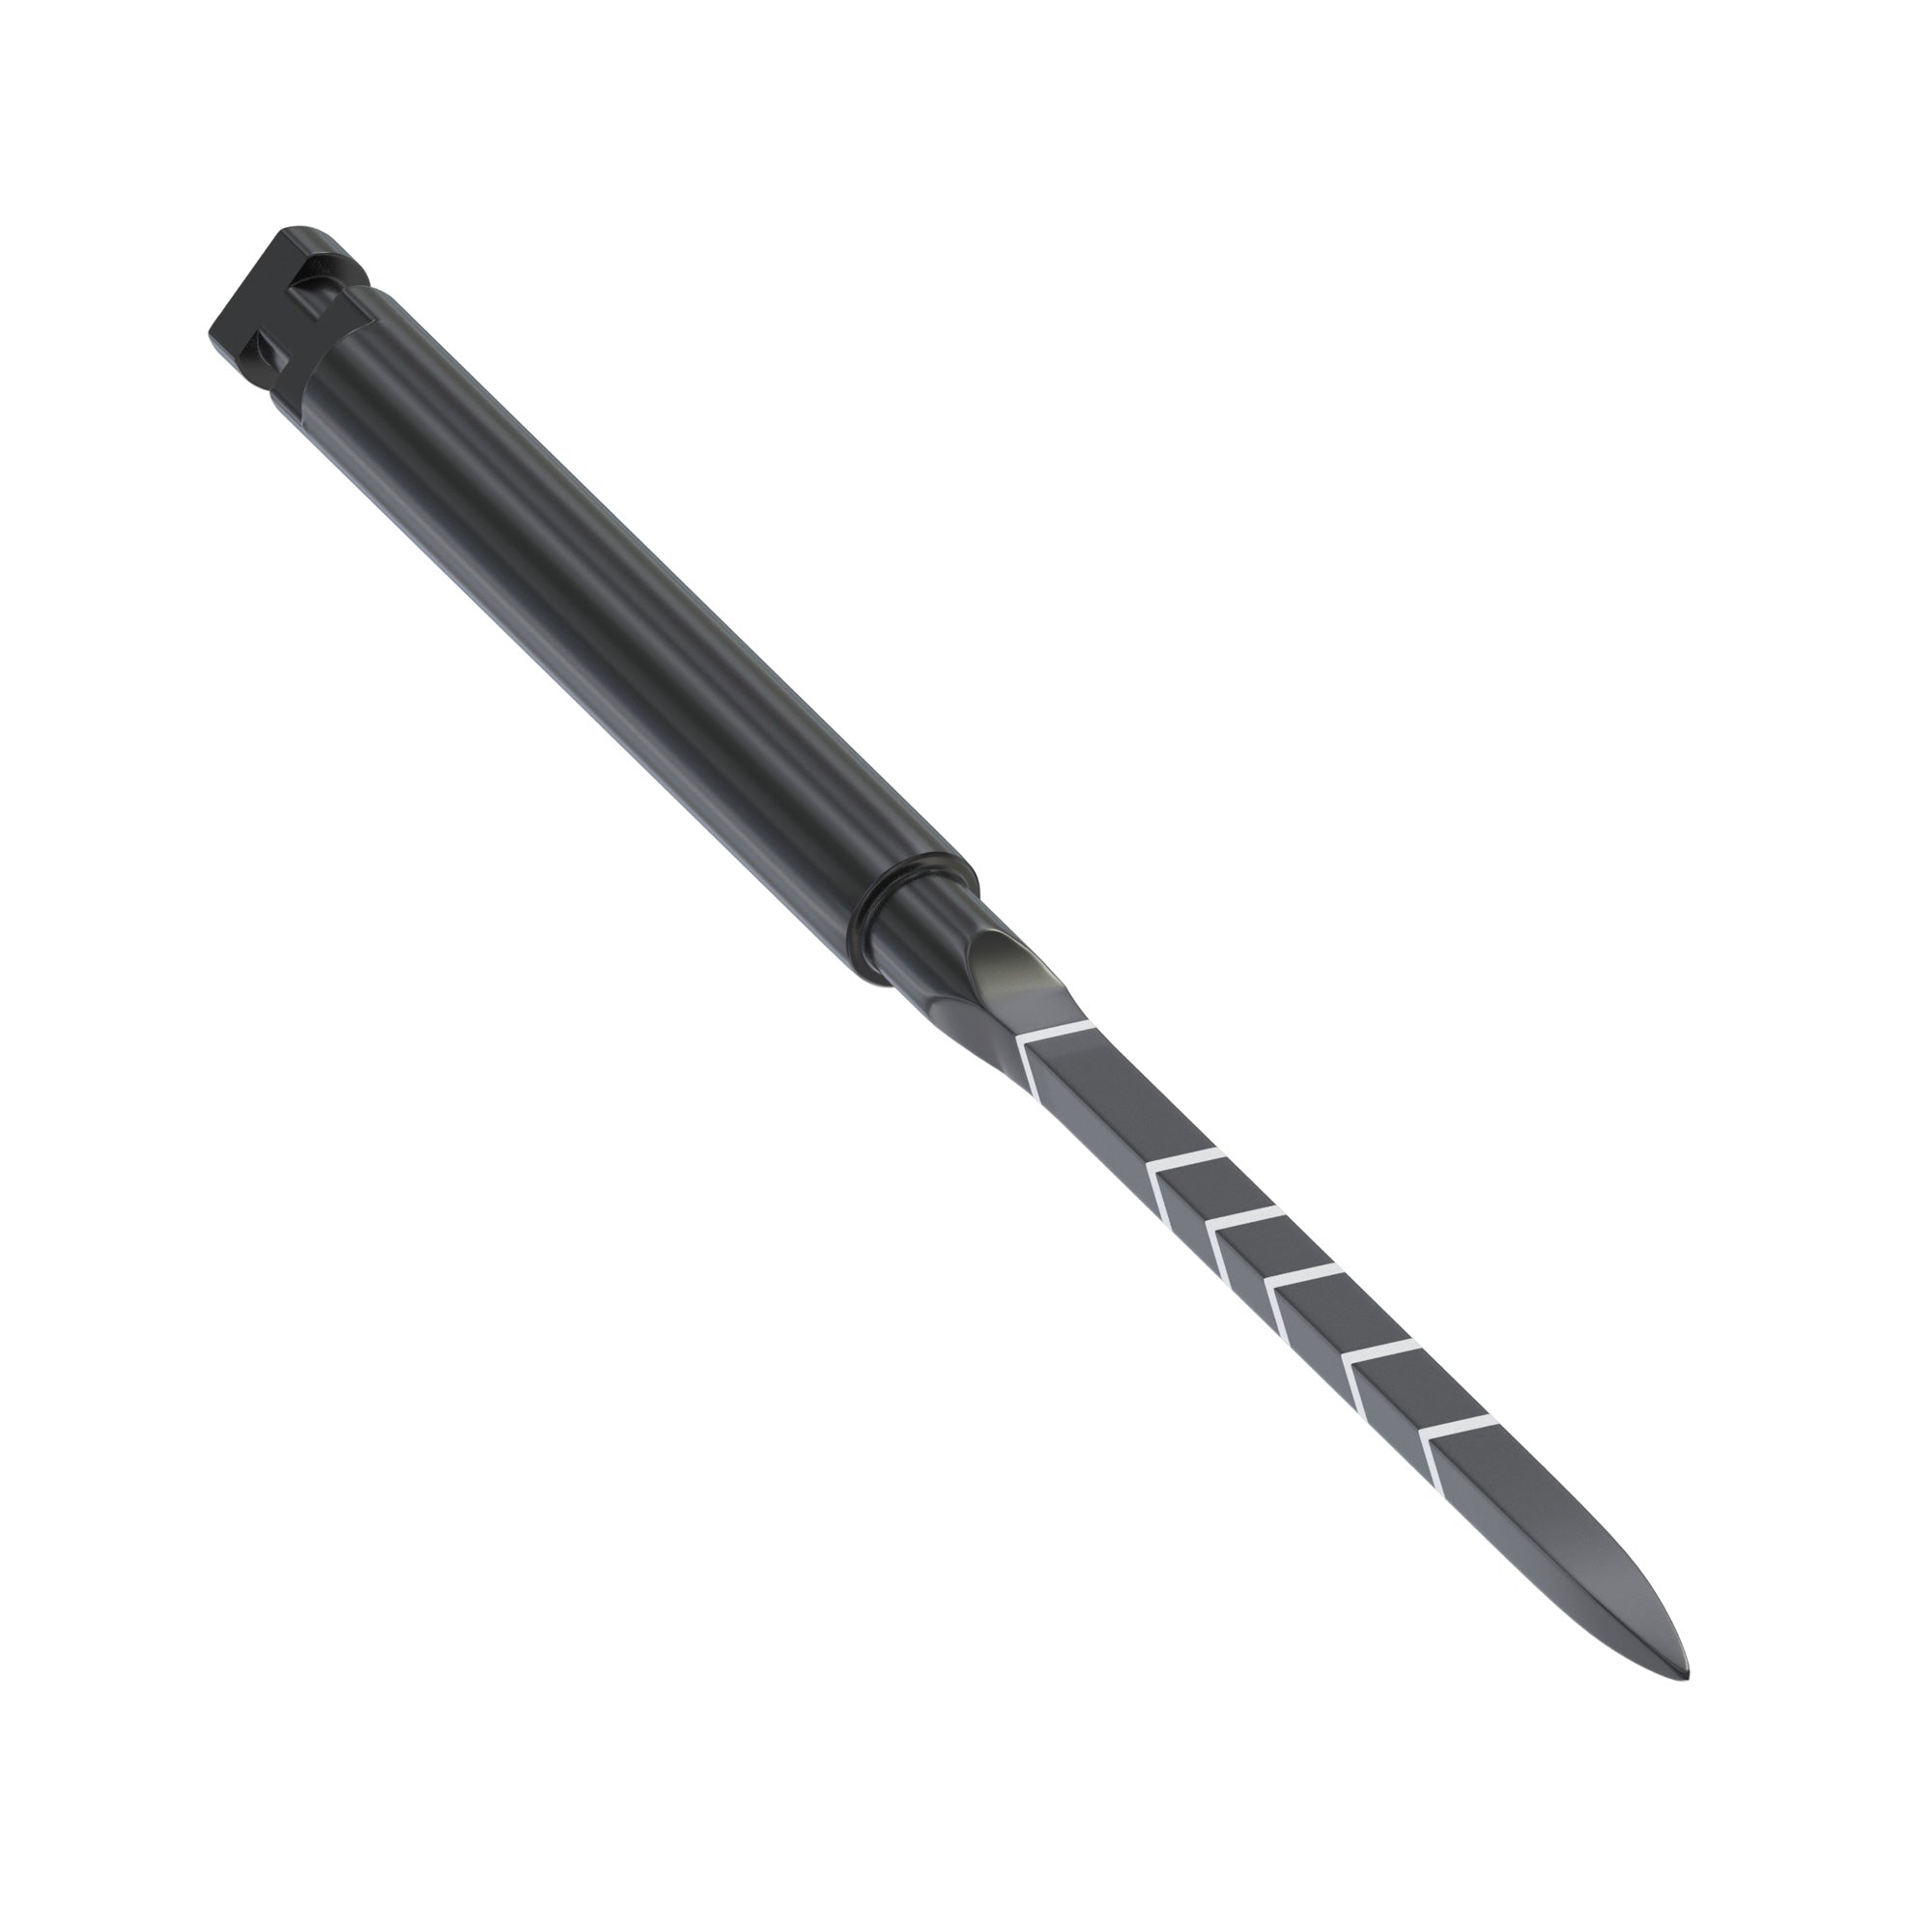 DSI Surgical Lance Initial Drill With DLC Coating Ø1.5mm